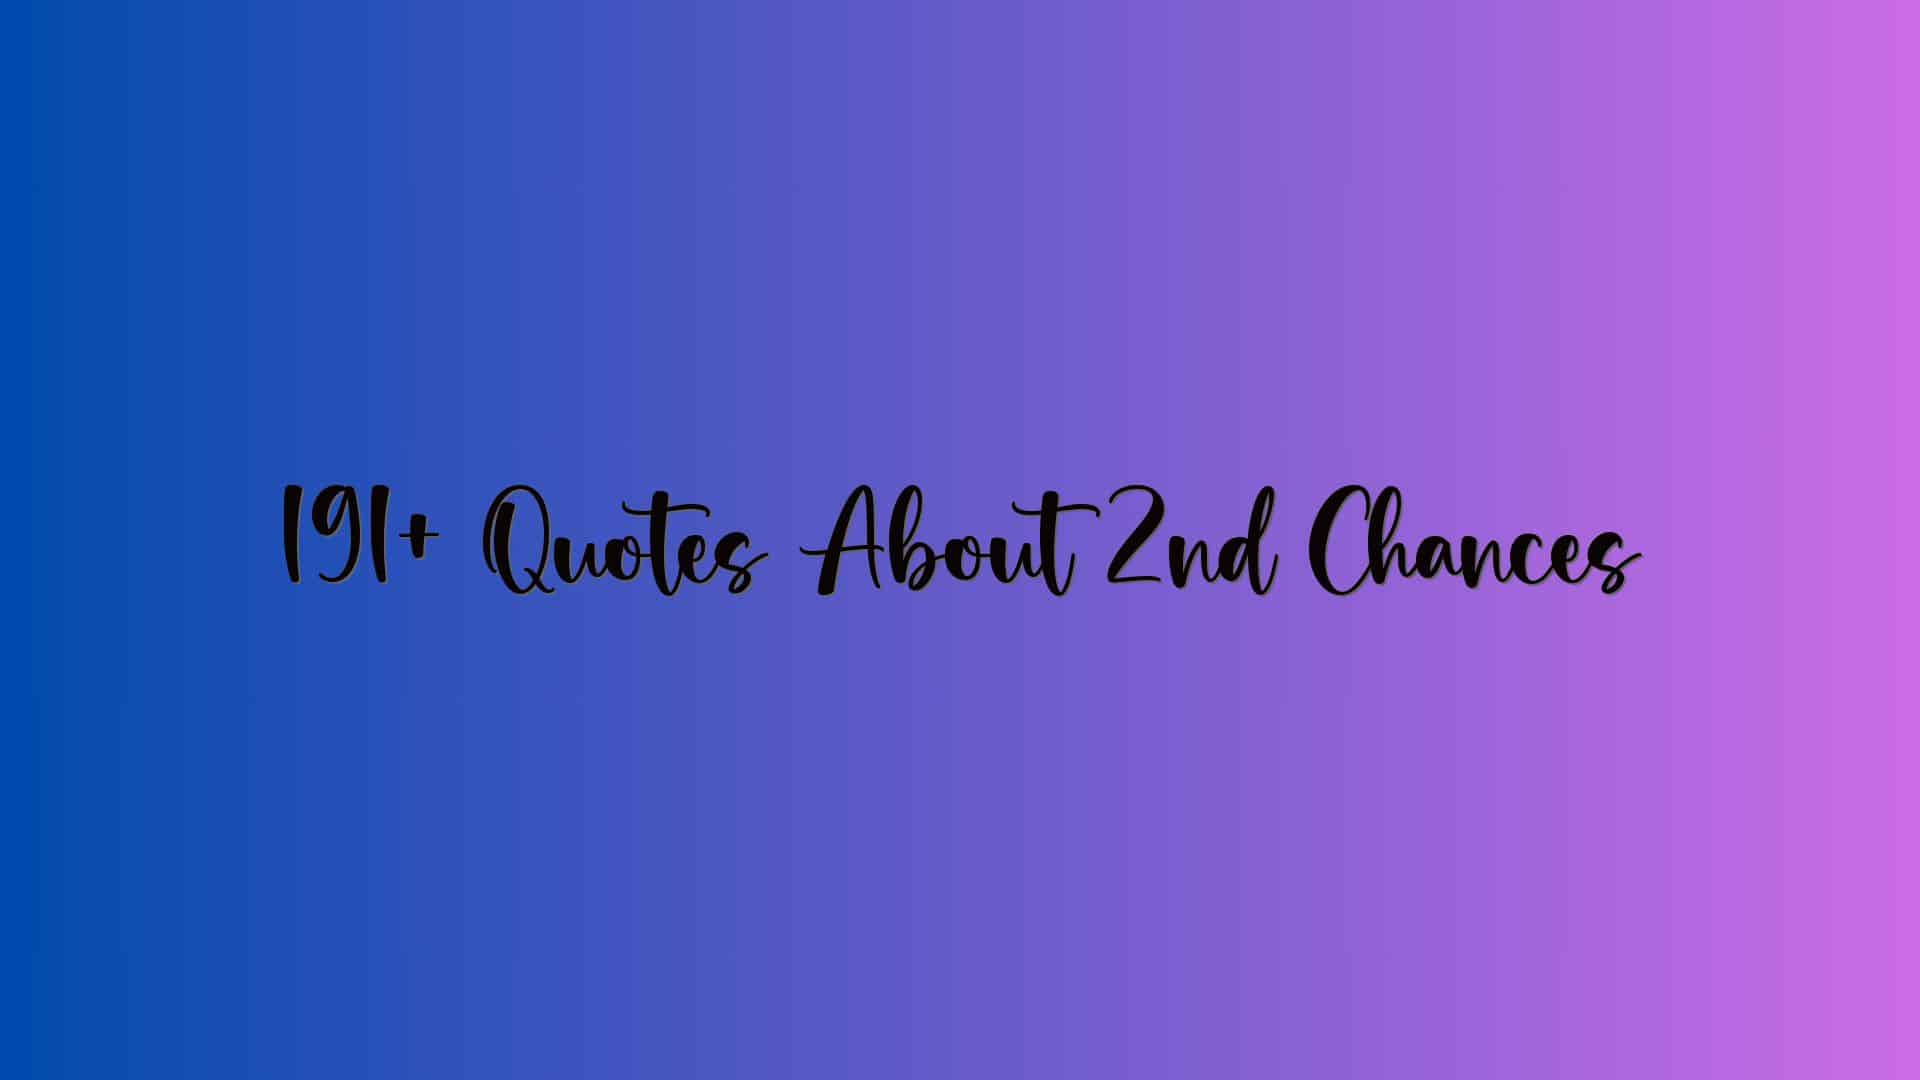 191+ Quotes About 2nd Chances